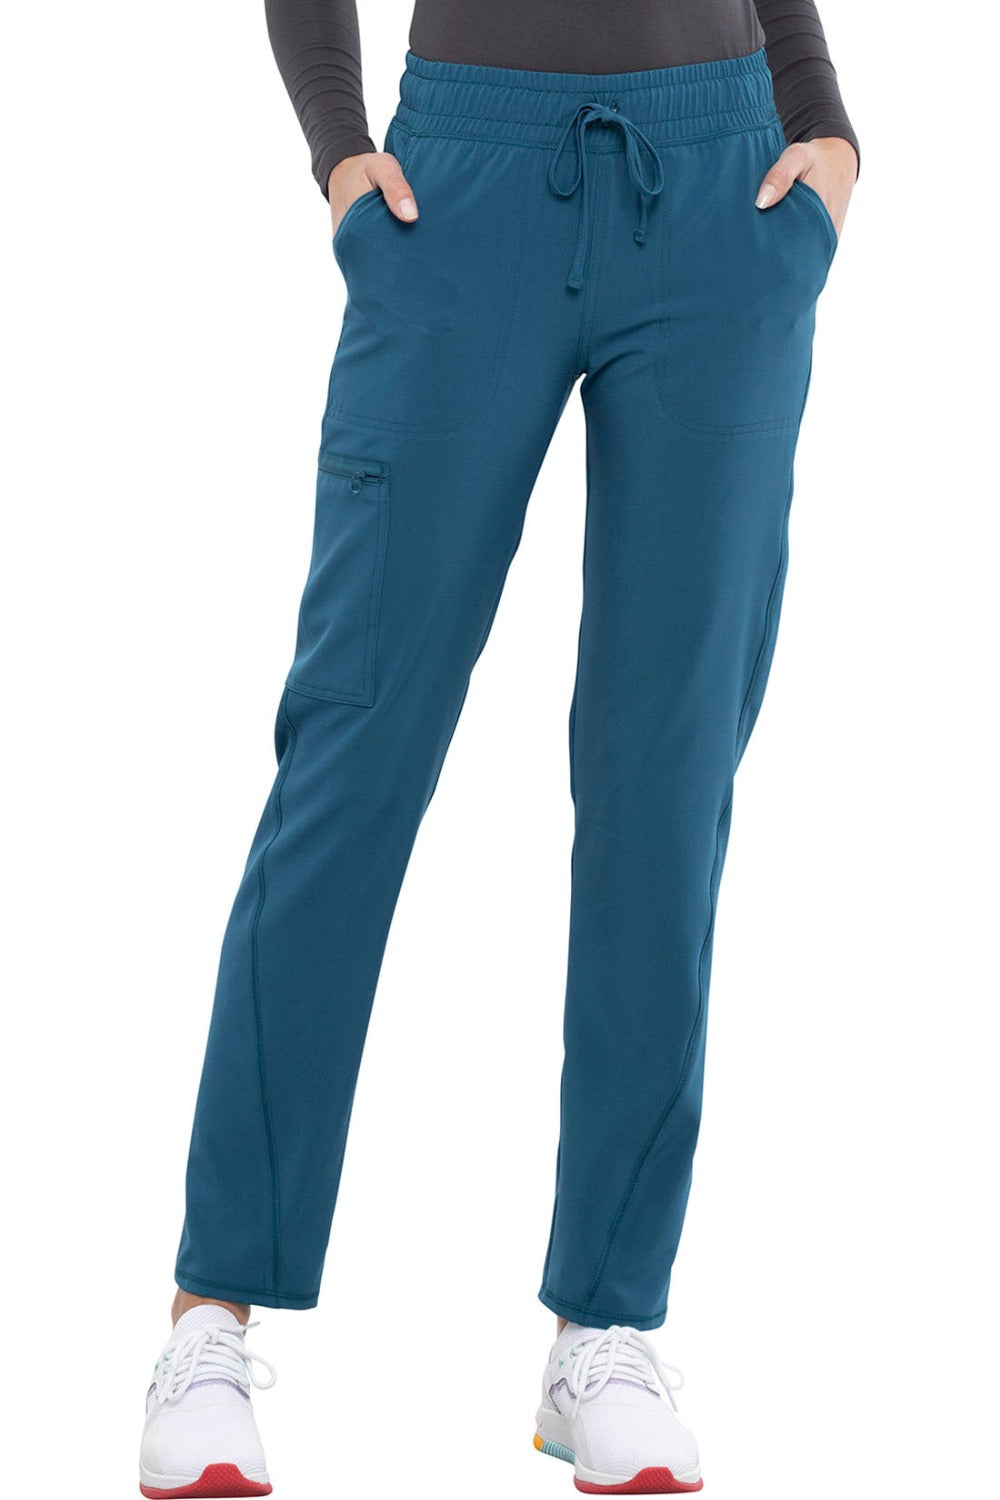 Cherokee Allura Scrub Pant Mid Rise Tapered Leg Drawstring in Caribbean at Parker's Clothing and Shoes.